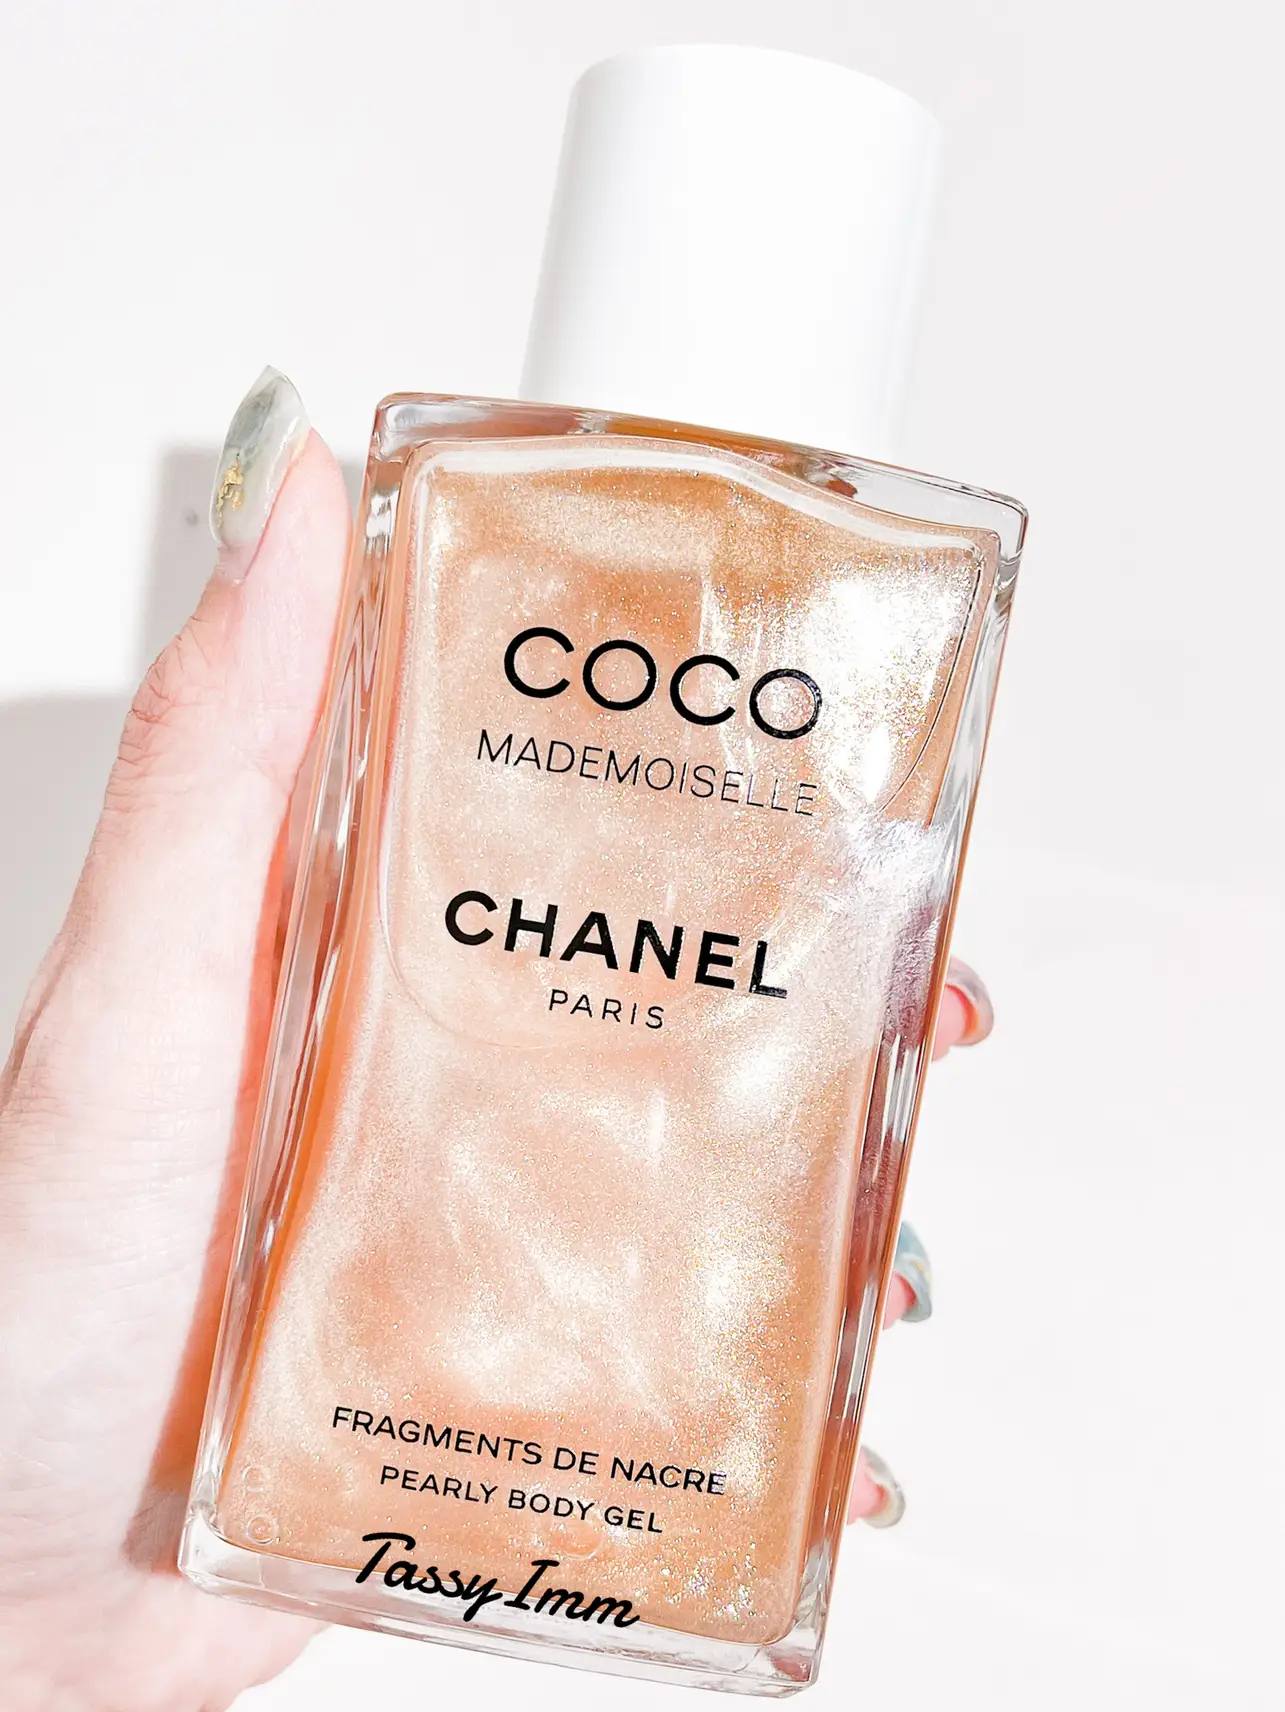 BODY GEL NEW FROM CHANEL ARE COVER, Gallery posted by Tassyimm